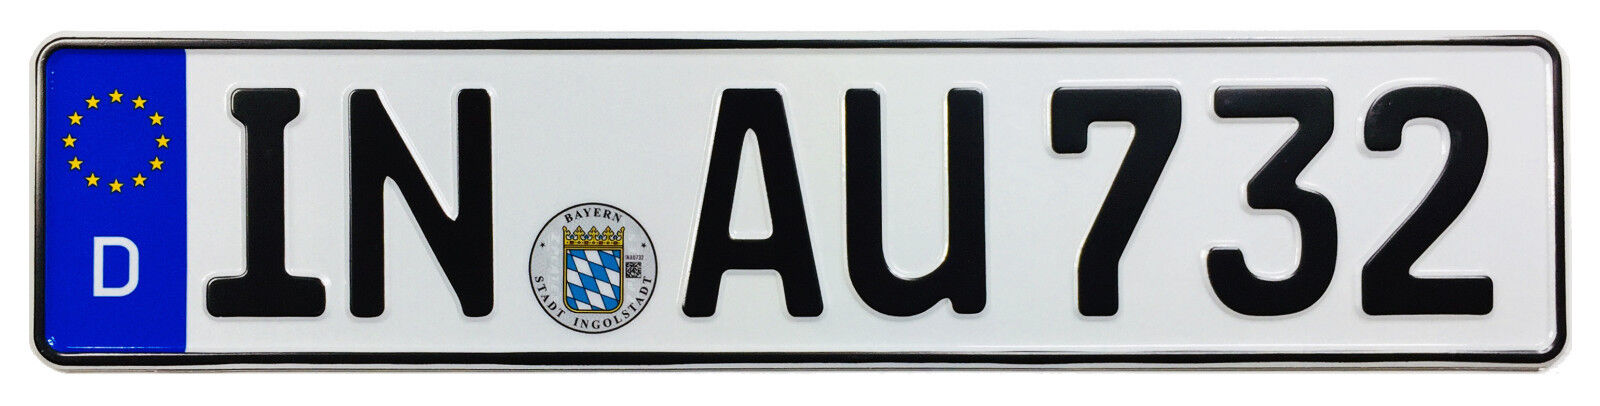 Audi Ingolstadt Front German License Plate AU by Z Plates with Unique Number NEW